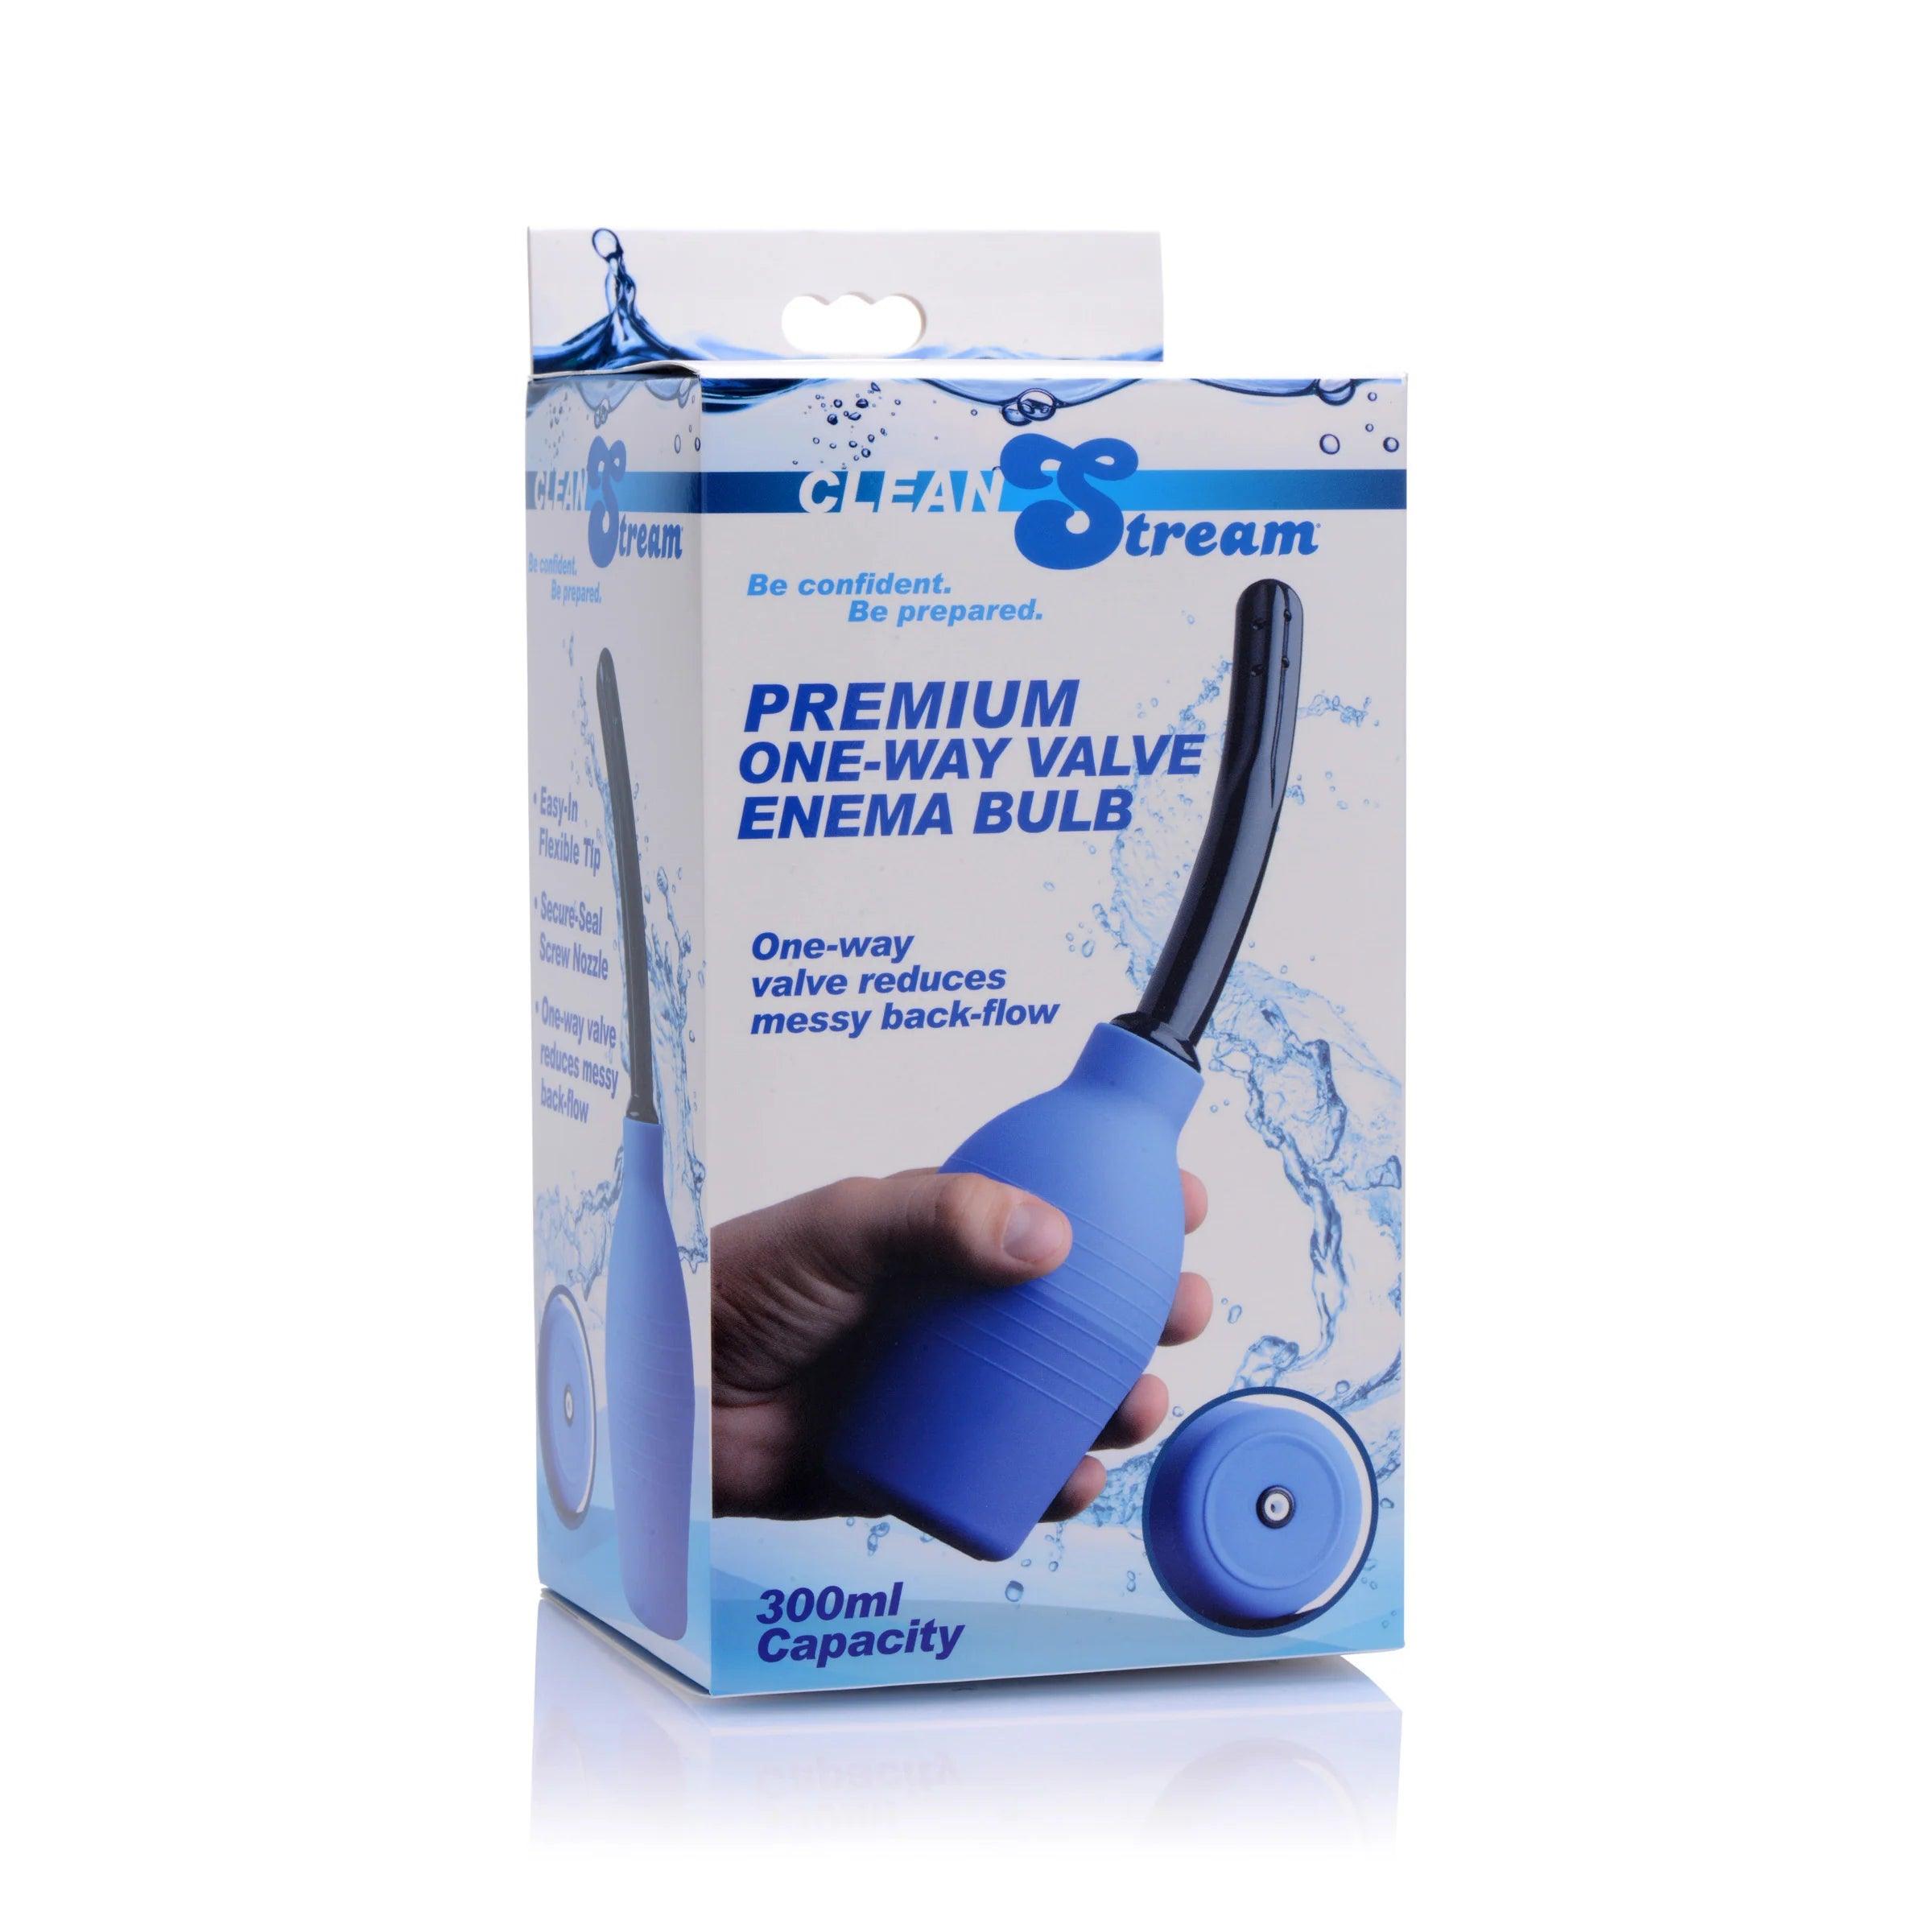 CleanStream Premium One-Way Enema Douche • Anal Cleansing System - Happibee